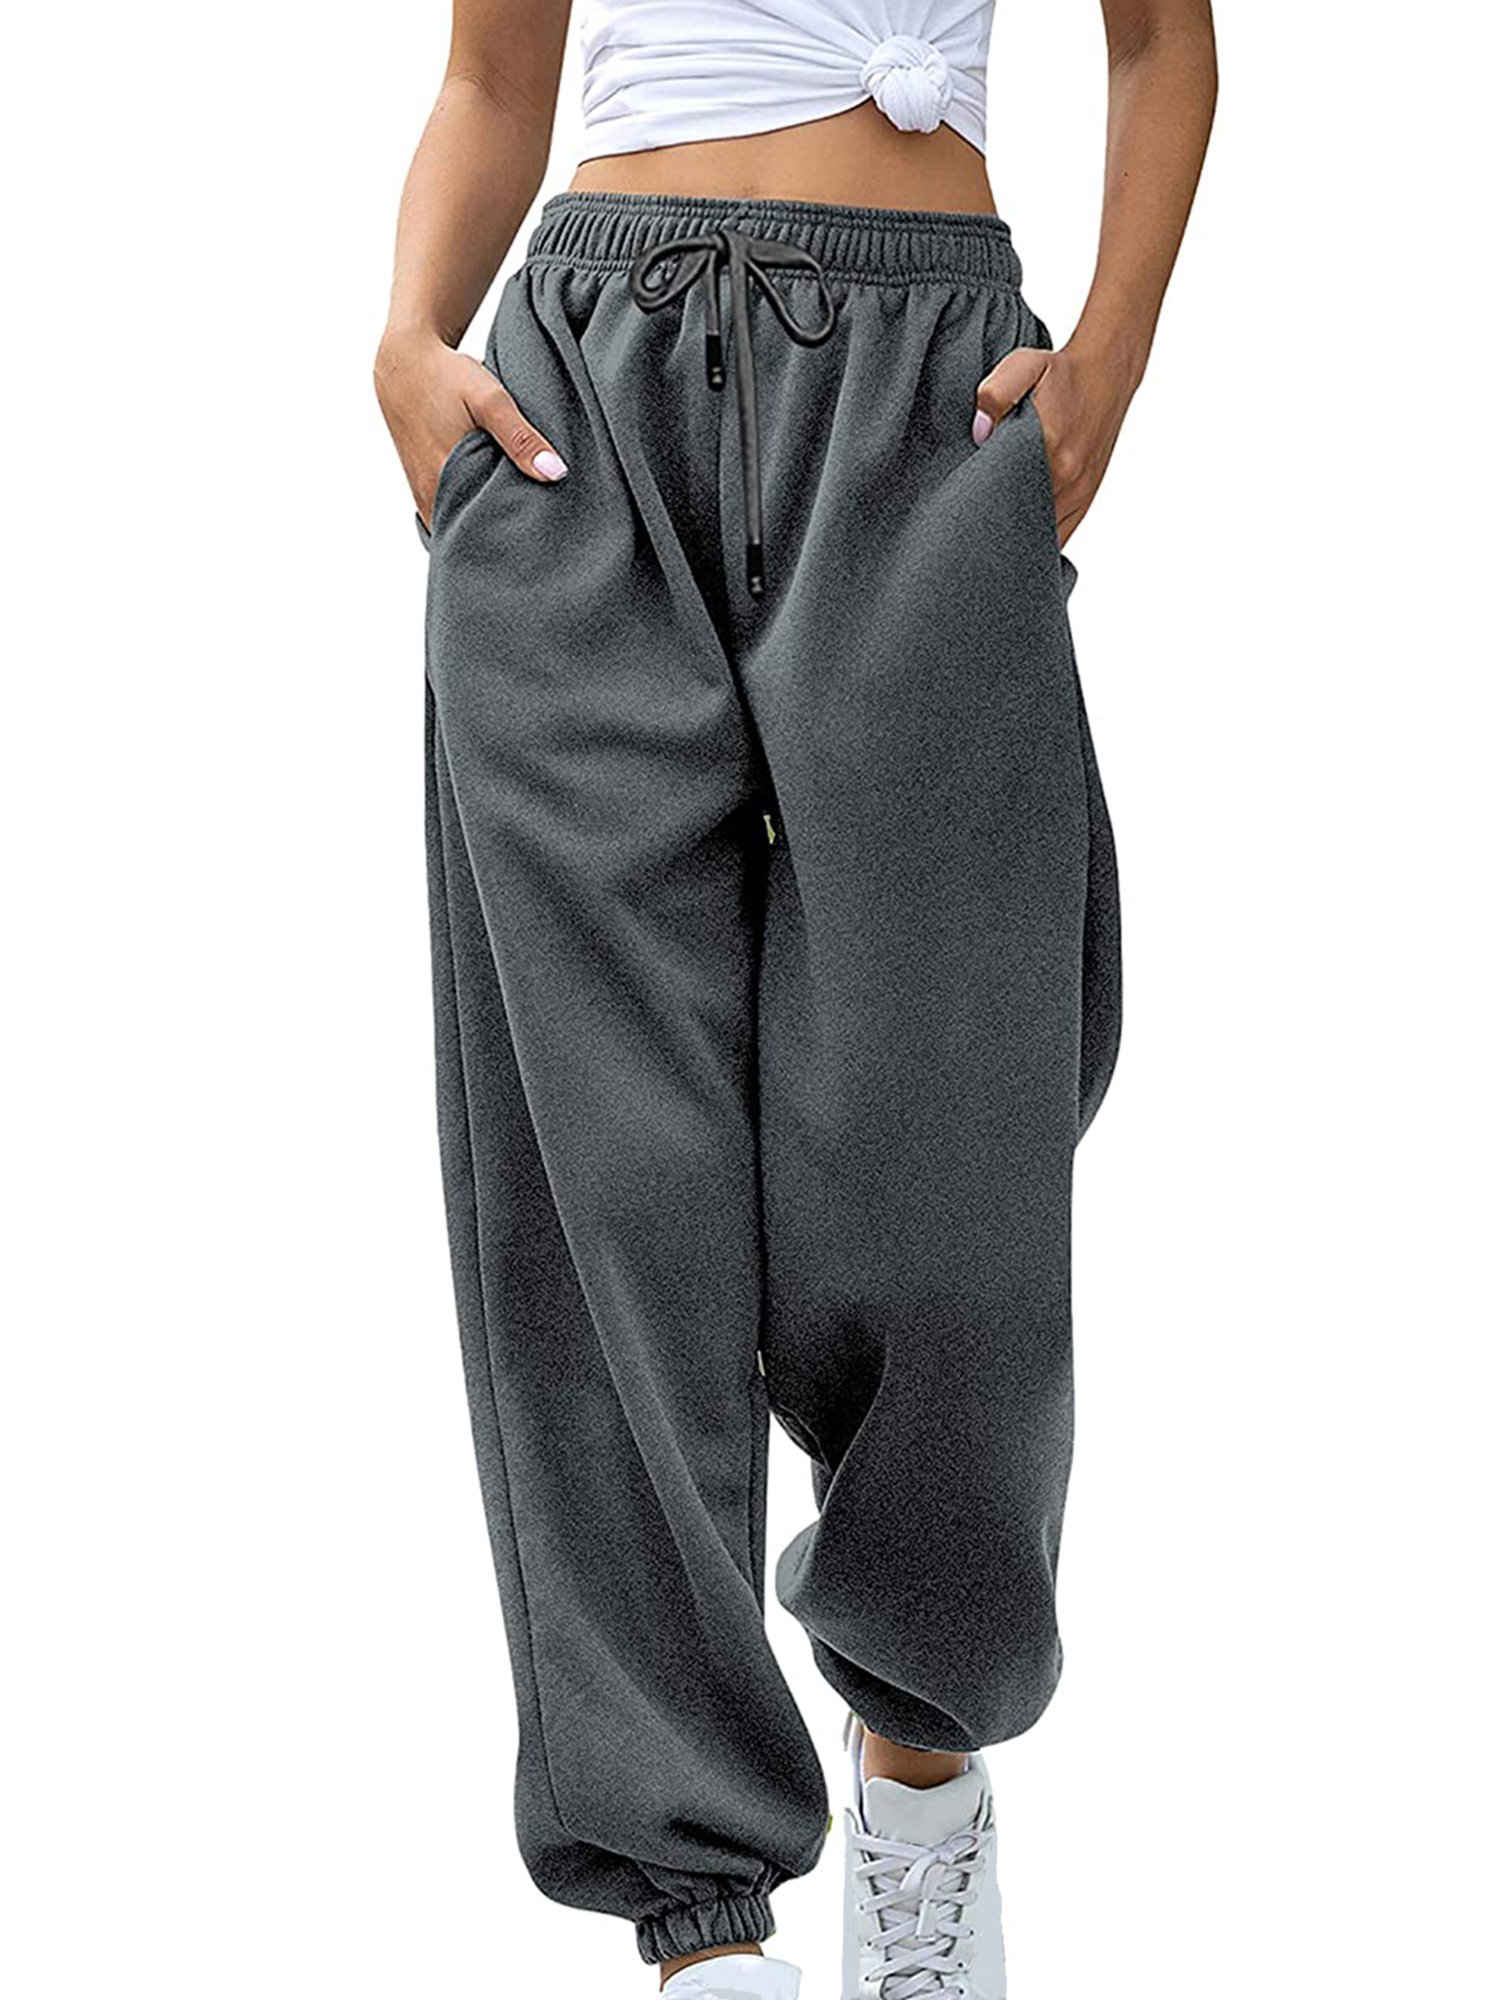 Lazybaby Womens High Waisted Sweatpants Drawstring Jogger Sweat Pants Cinch  Bottom Workout Trousers